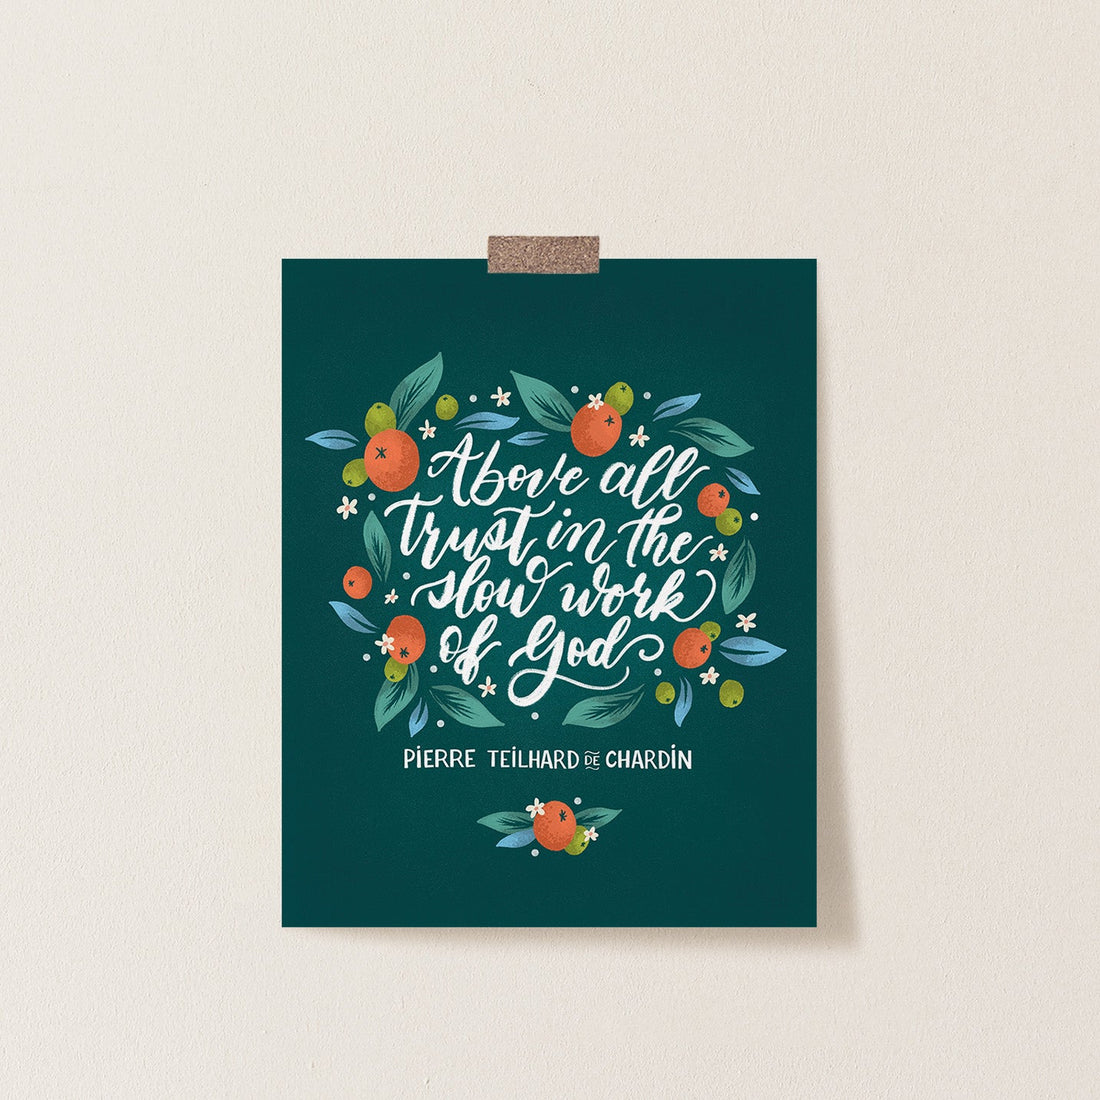 God Works in the Waiting Catholic Print - Little Way Design Co.